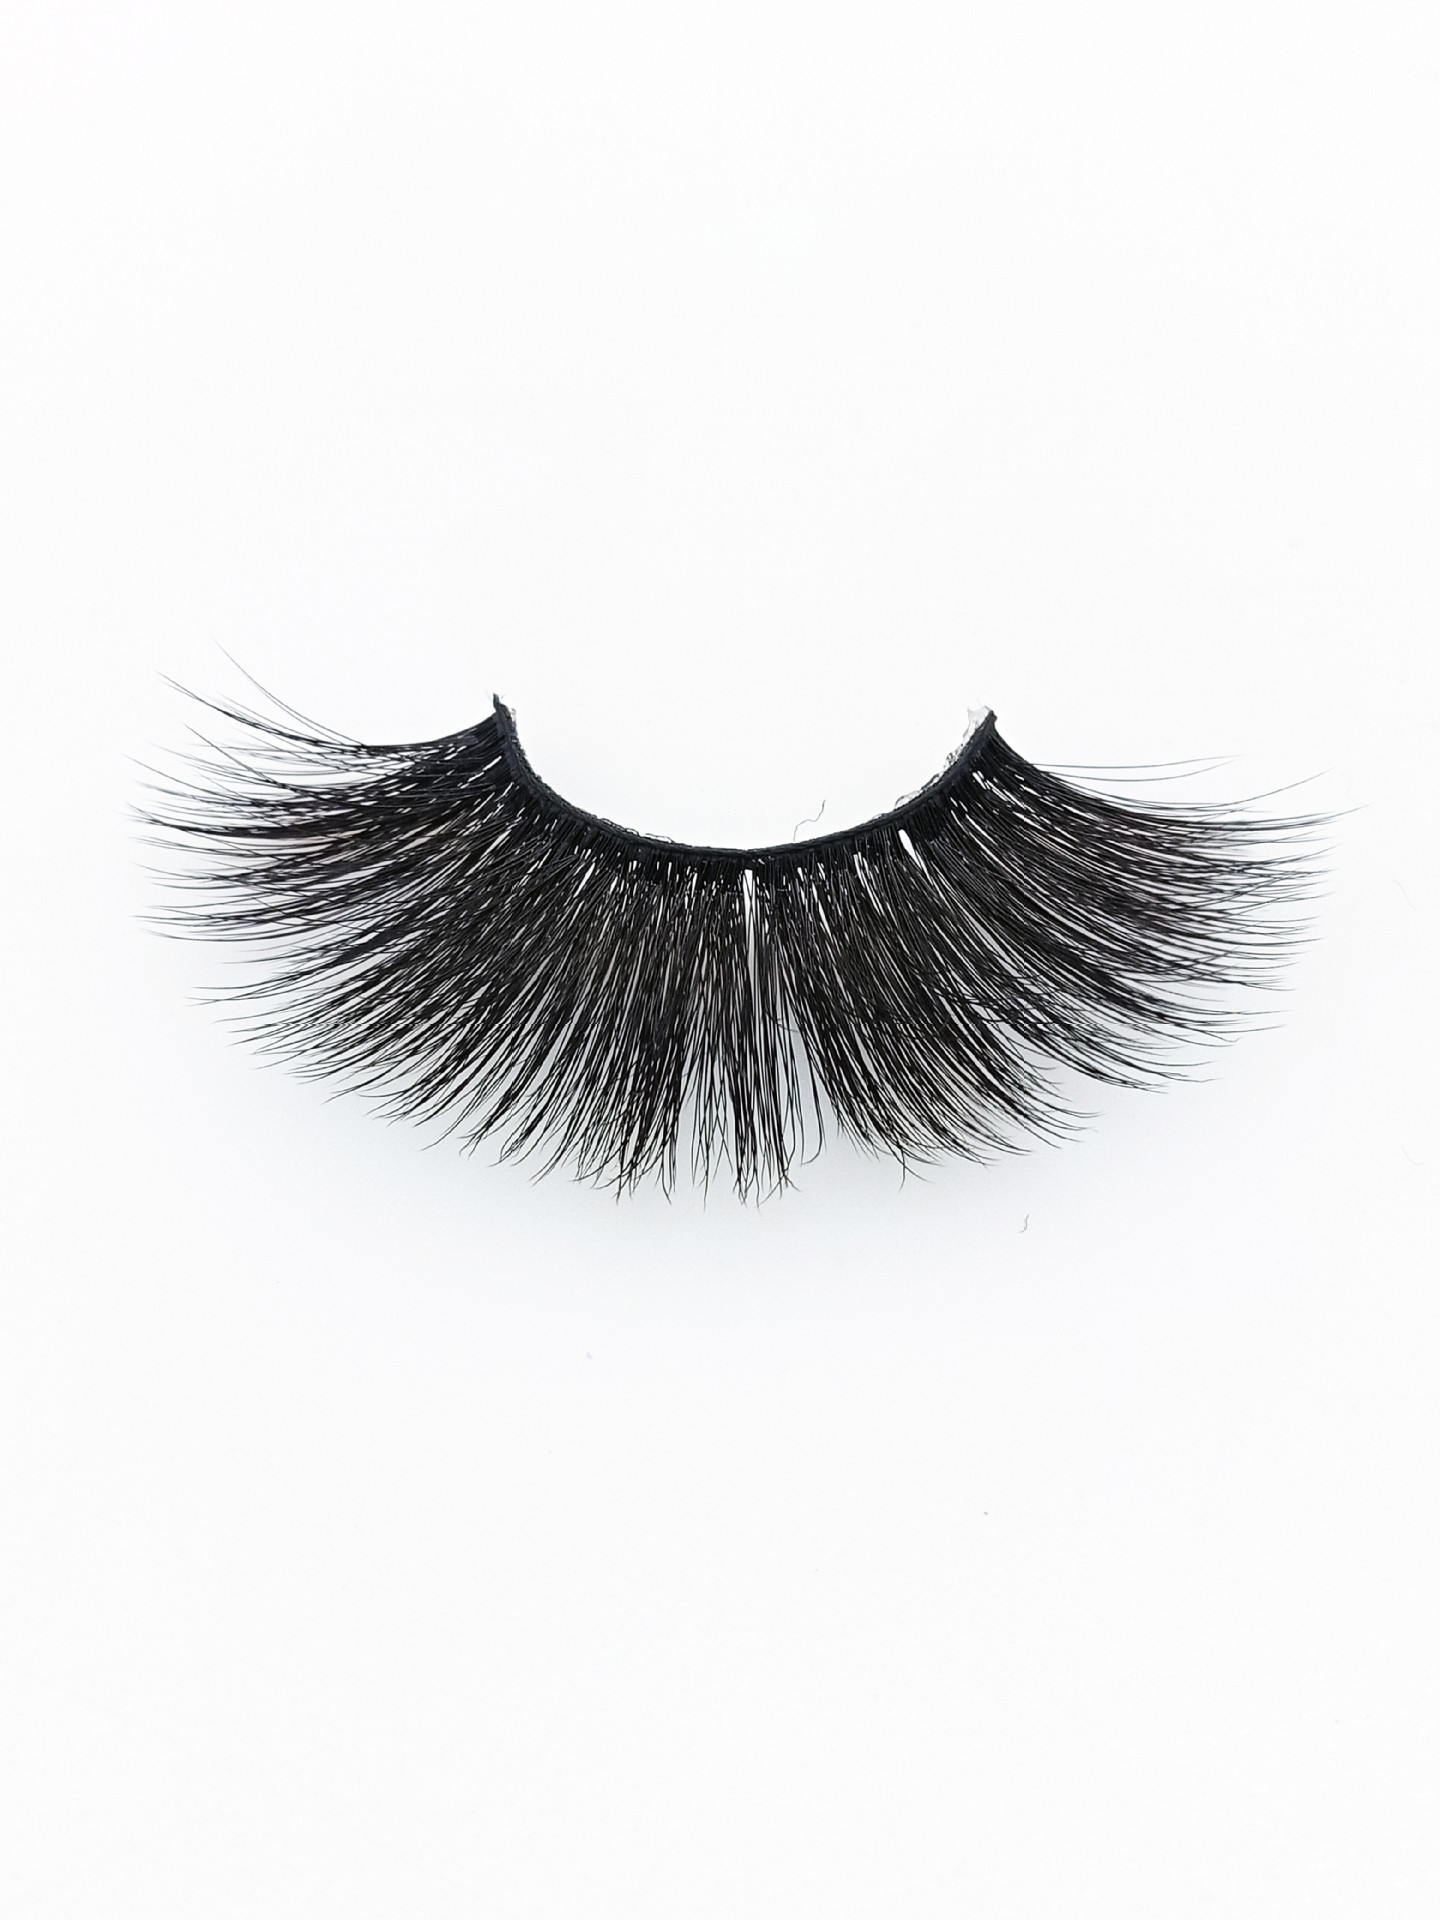 25mm False Eyelashes One-Pair Package Three-Dimensional Cross Thick Curl Multi-Layer Exaggerated Handmade Factory Wholesale